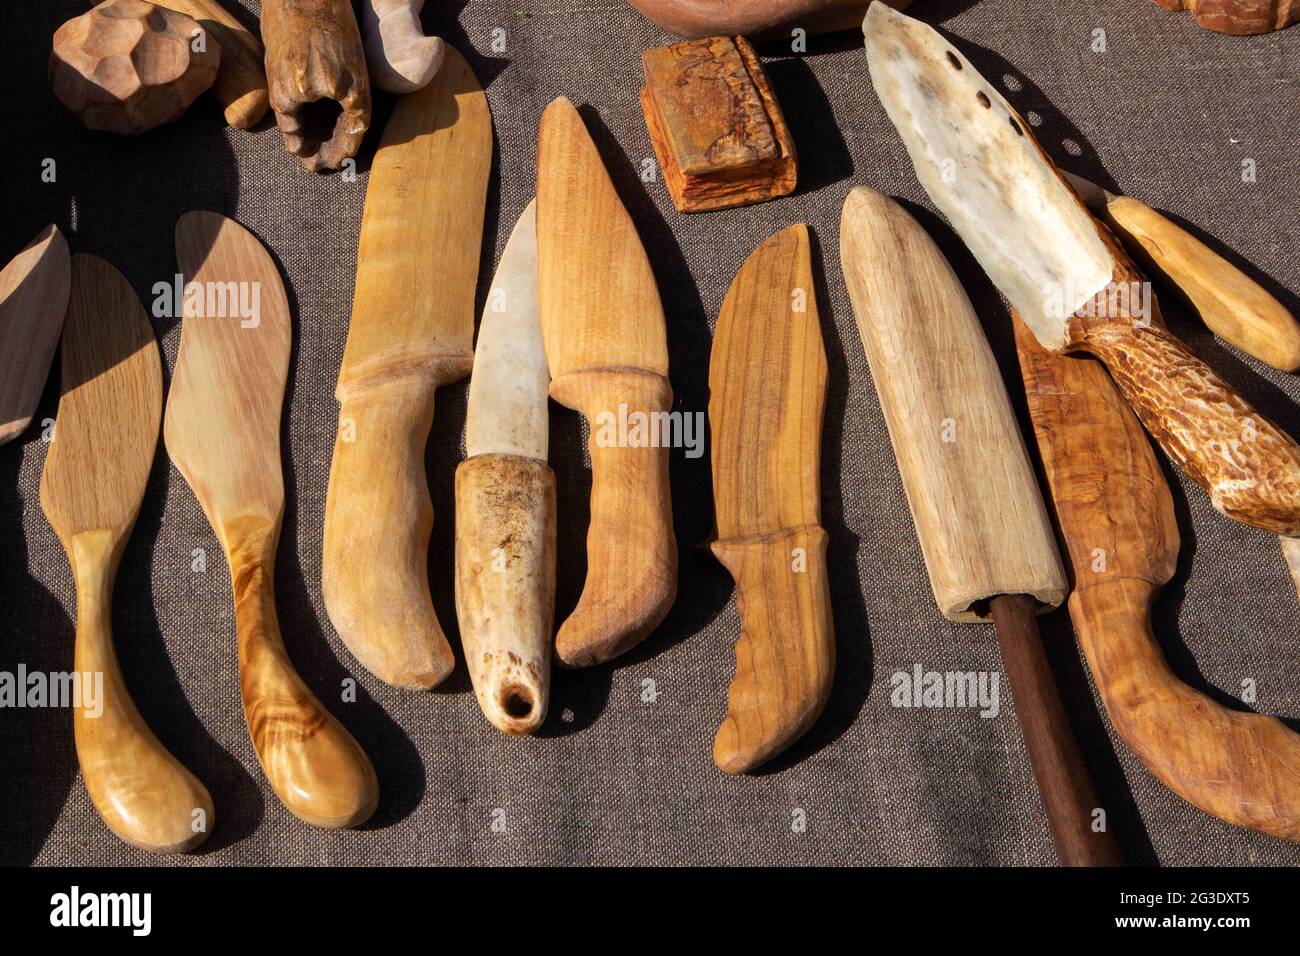 The trade tent with decorative wooden handmade knives at the open air village fair Stock Photo